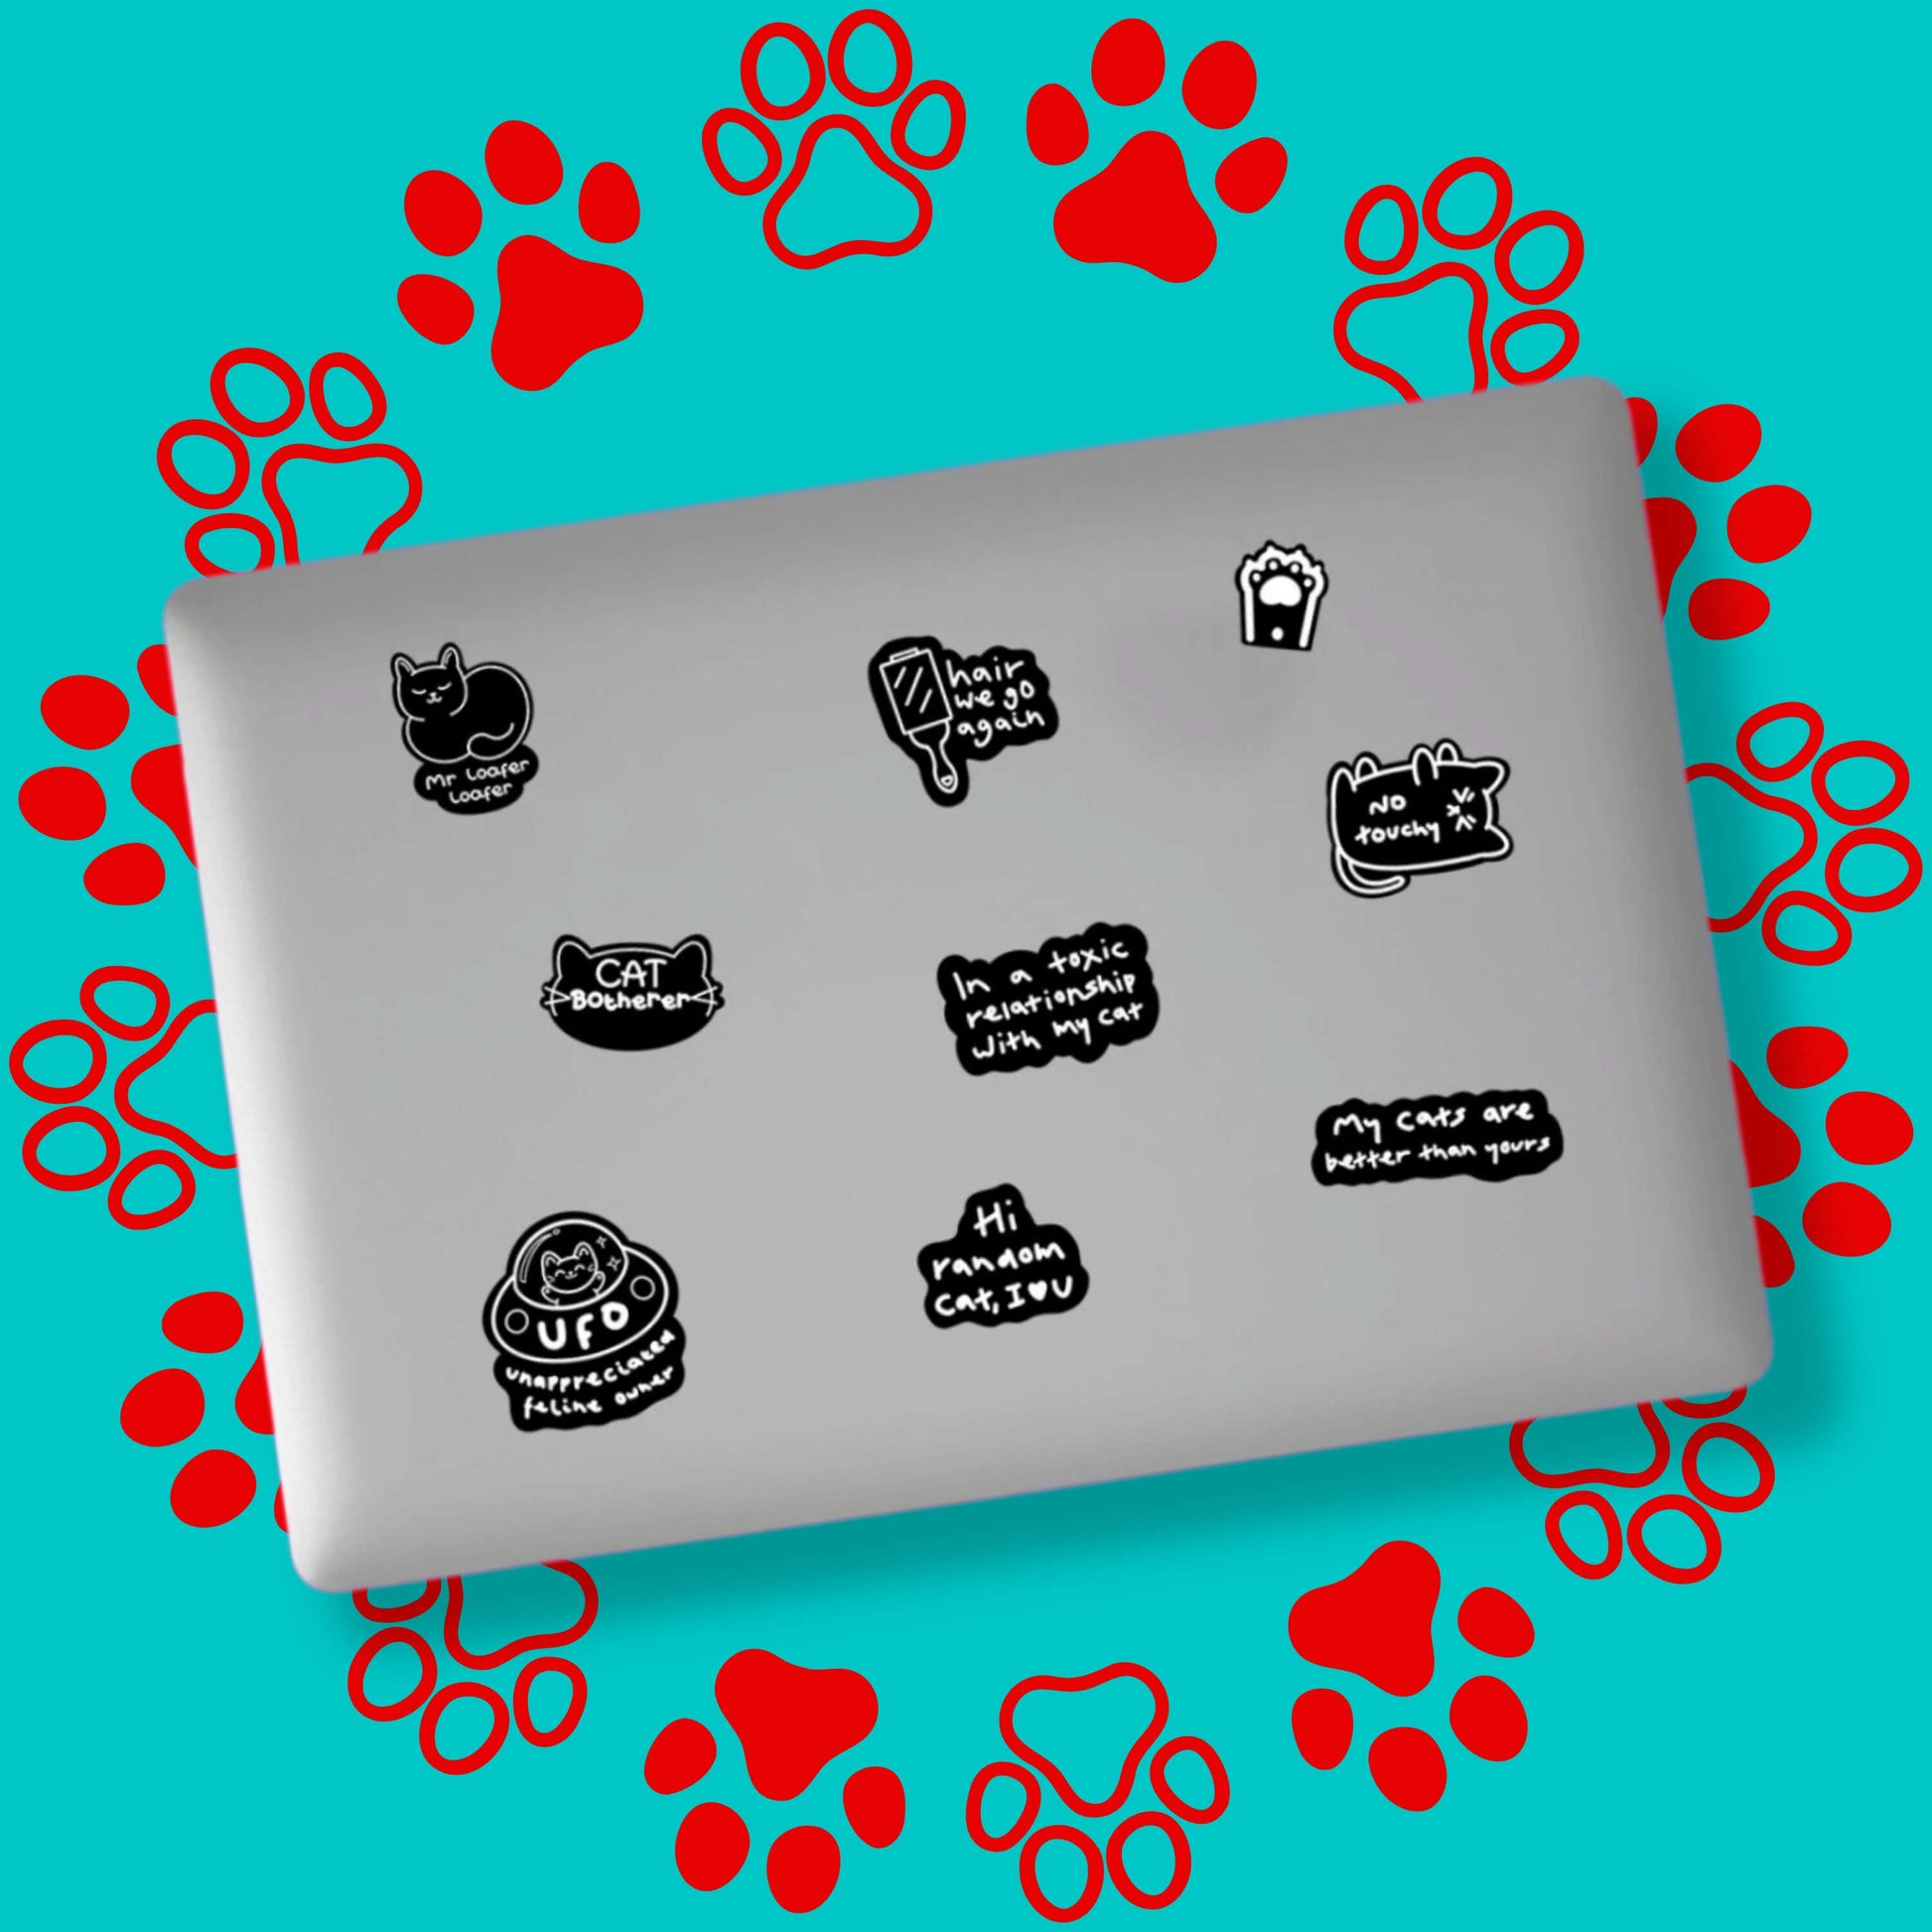 The Cat Parent Sticker Sheet - A6 Sticker Sheet stuck randomly all over a silver laptop on a red and blue paw print background. The sticker sheet features black and white stickers with a cat theme such as 'cat botherer', 'hair we go again', 'hi random cat I love u', paws, cats and more.